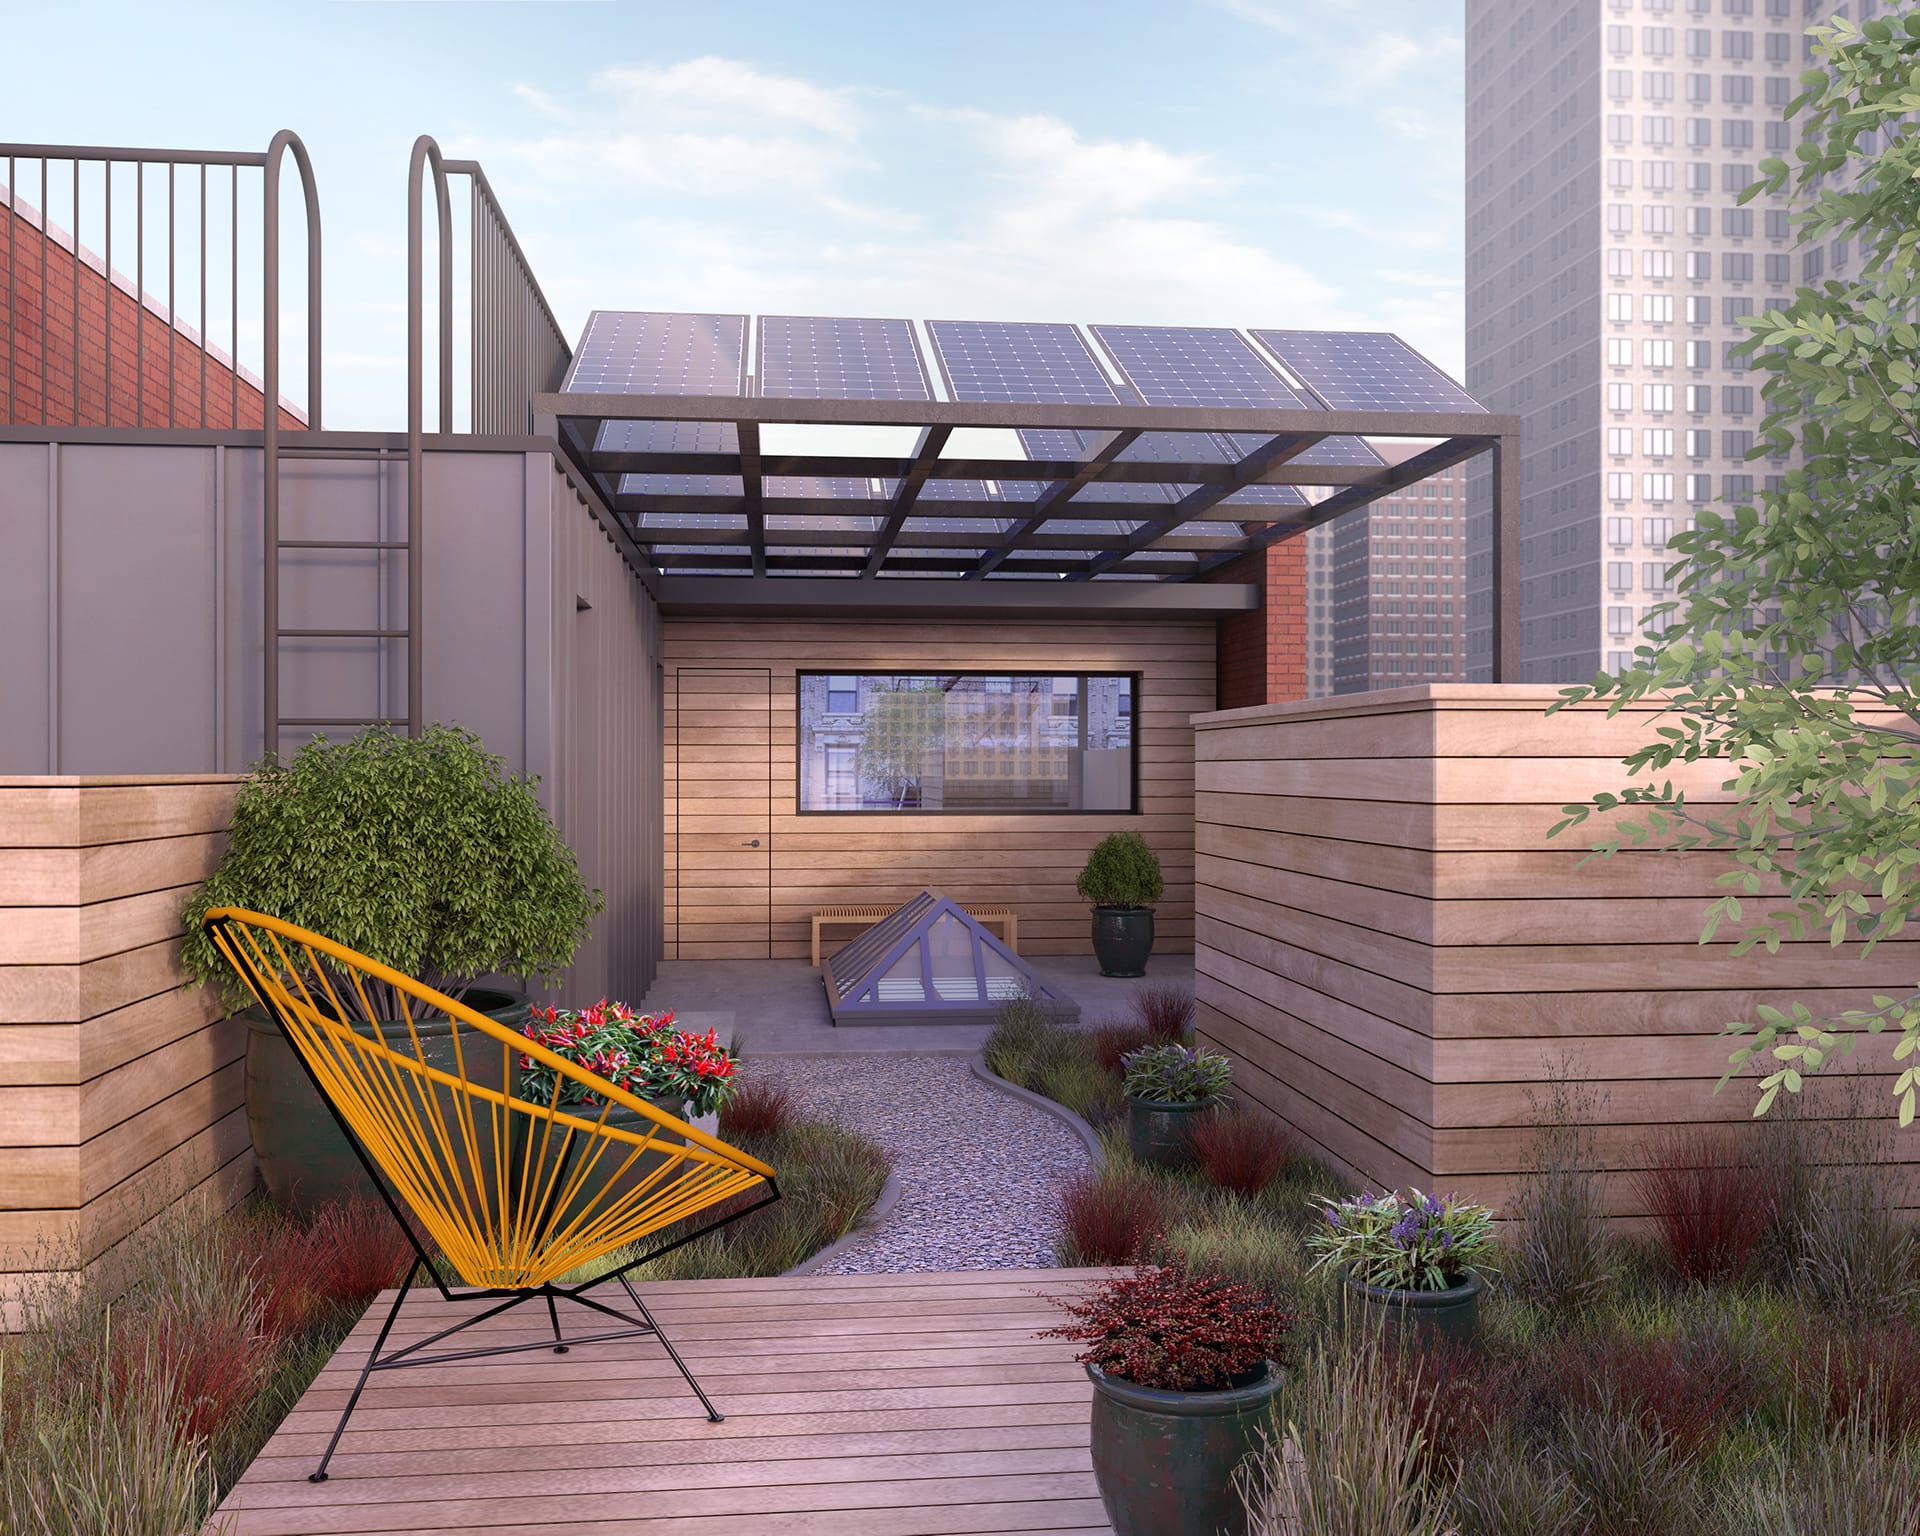 Rendered image of a green roof with wood siding and planters and a solar canopy.